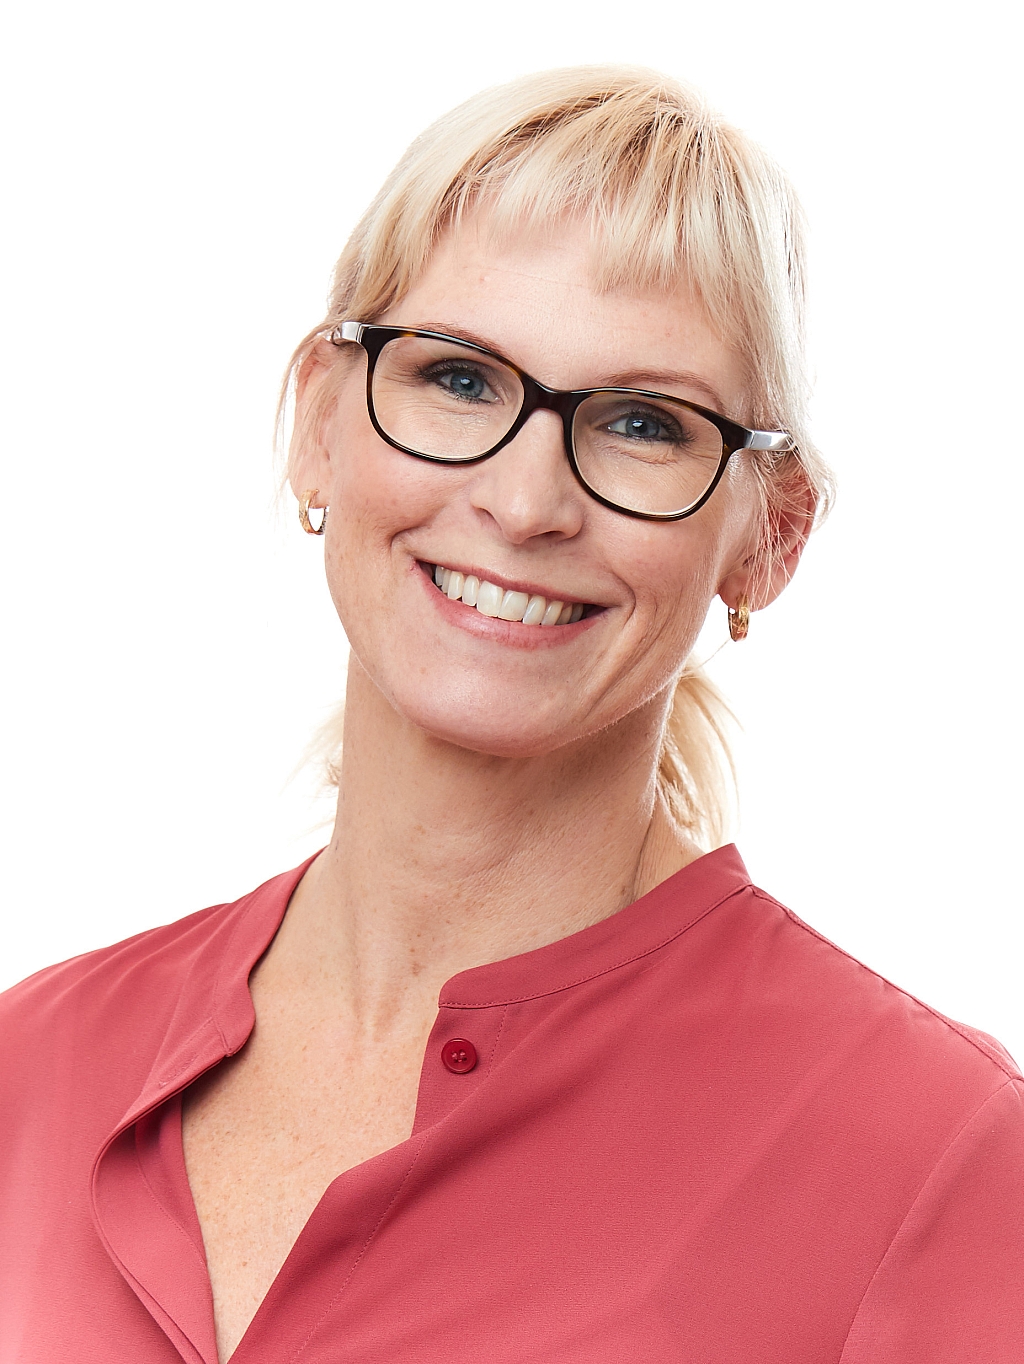 Linda Bergqvist, External Relations Manager at the School of Engineering.